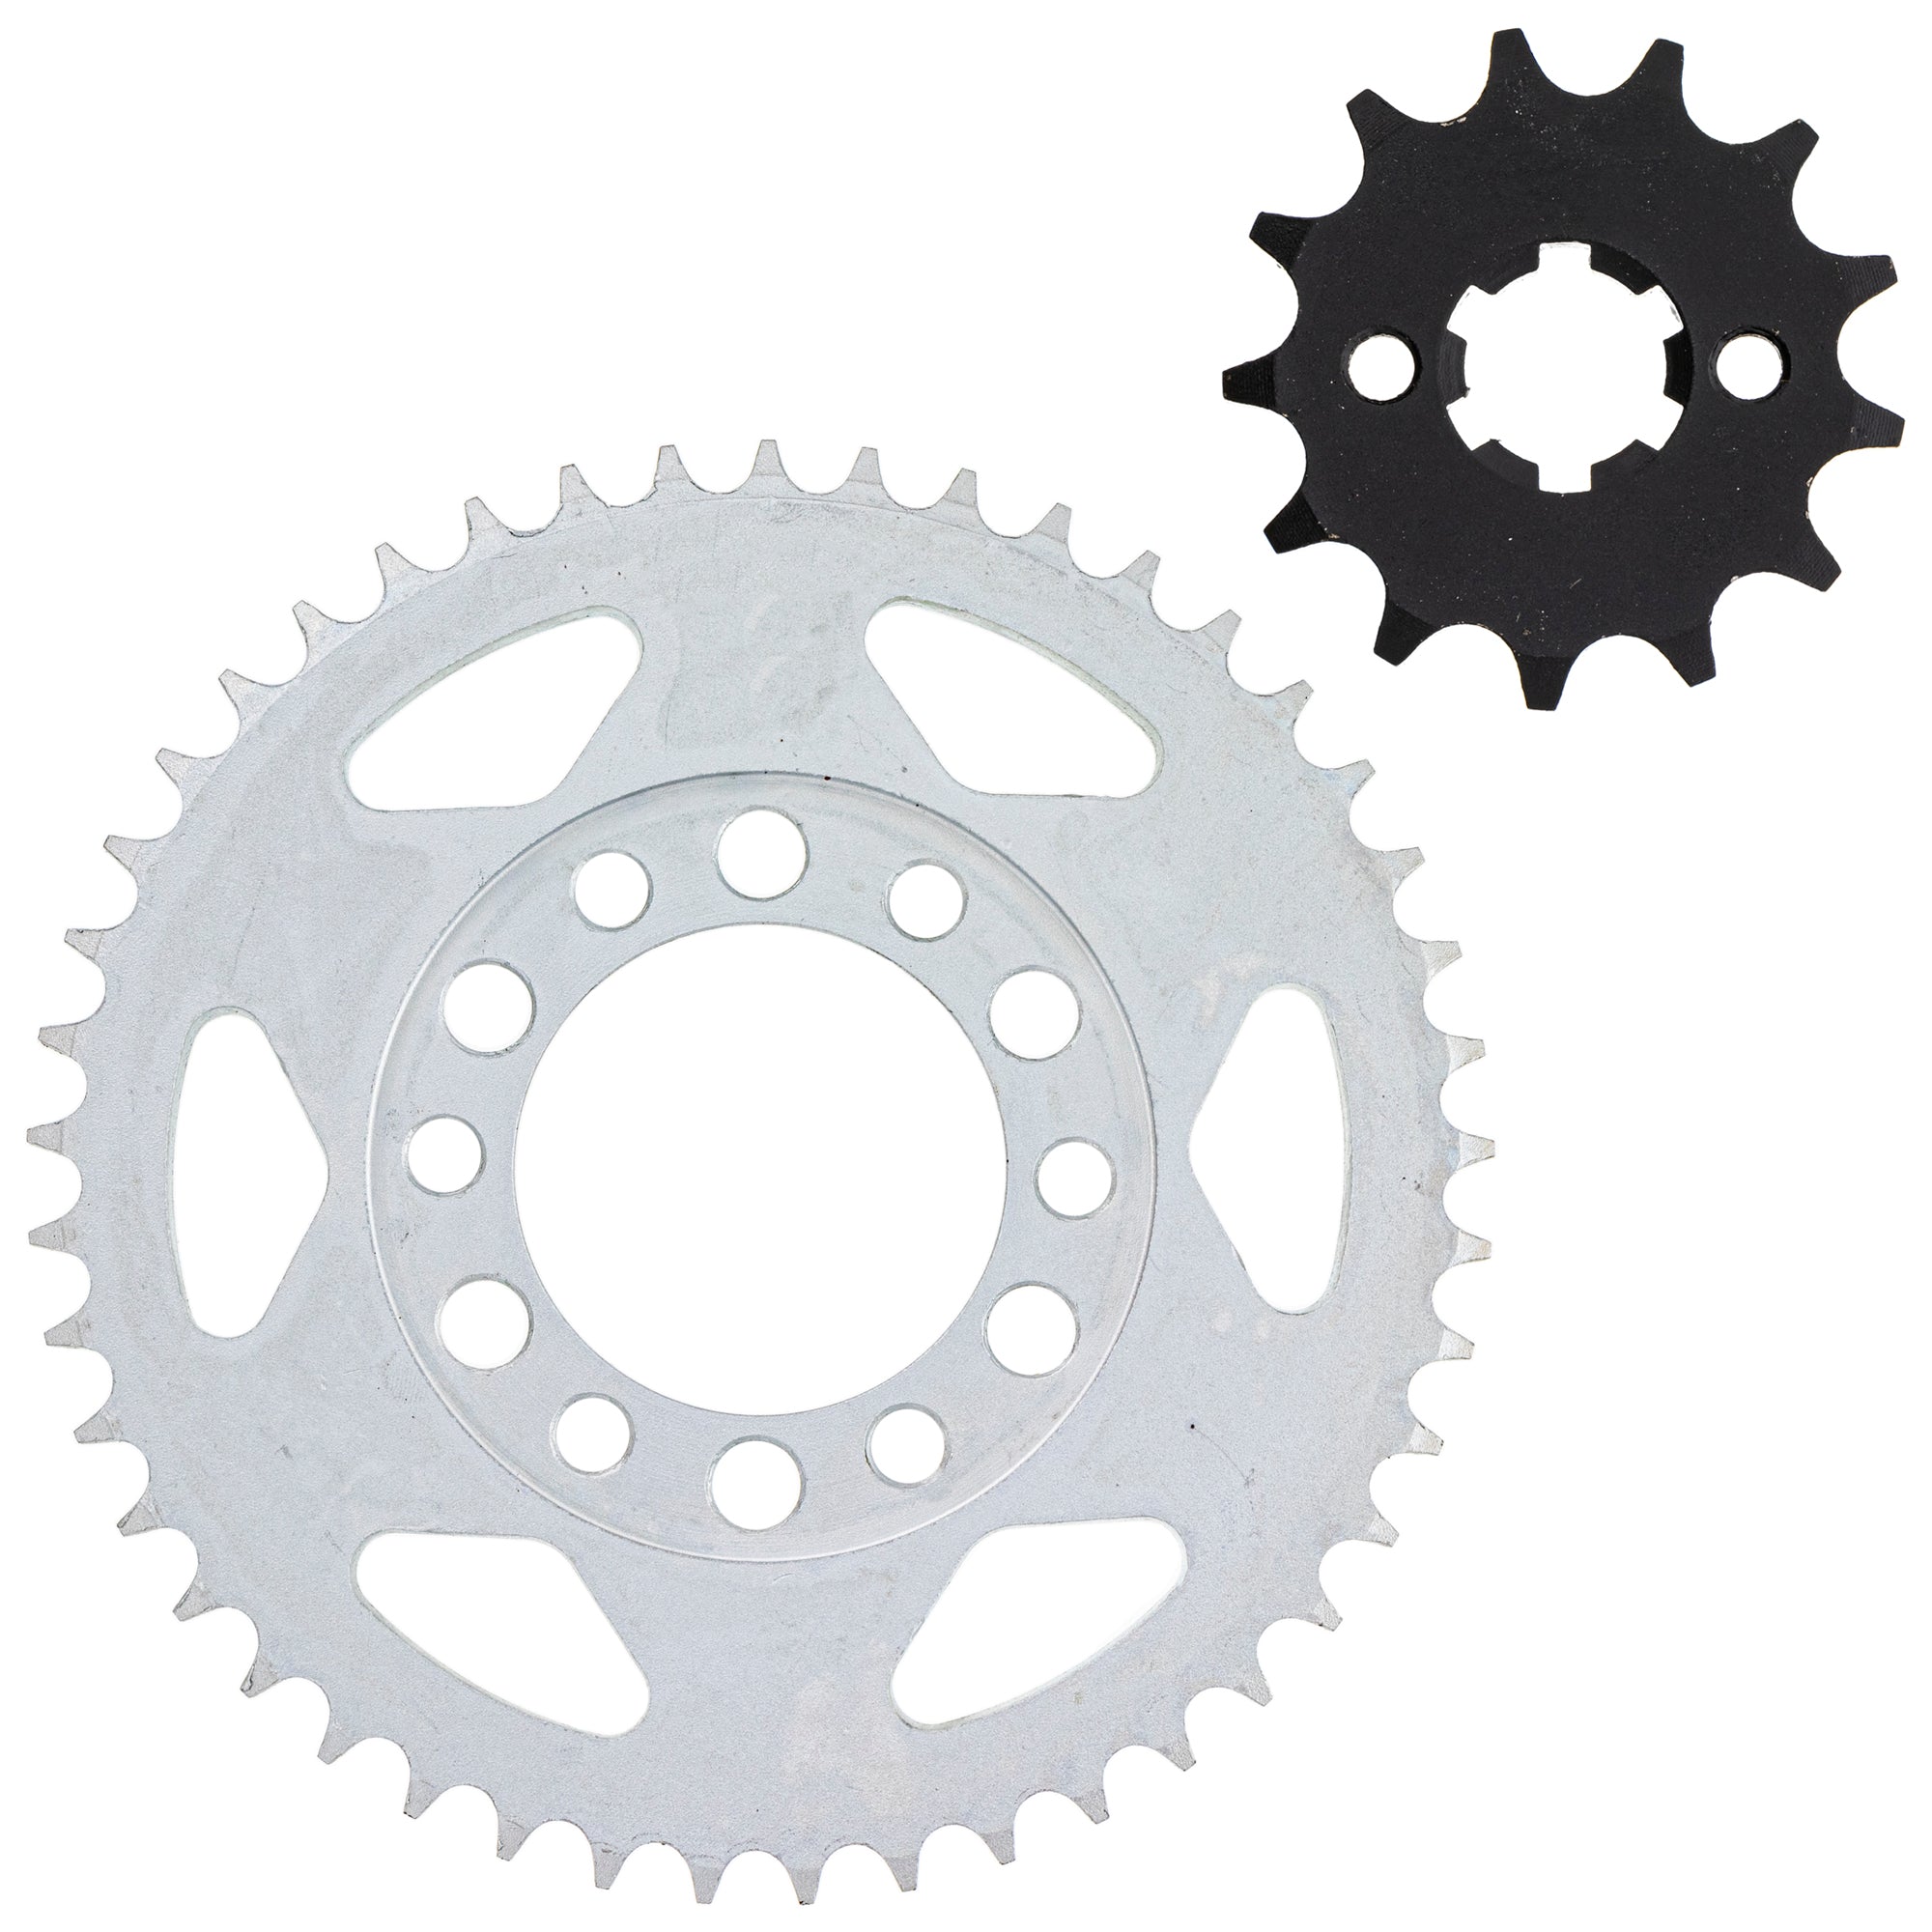 Drive Sprocket Set Front & Rear for Yamaha CT3 CT1 ATMX AT3 93822-13213-00 248-25445-11-00 NICHE MK1003498